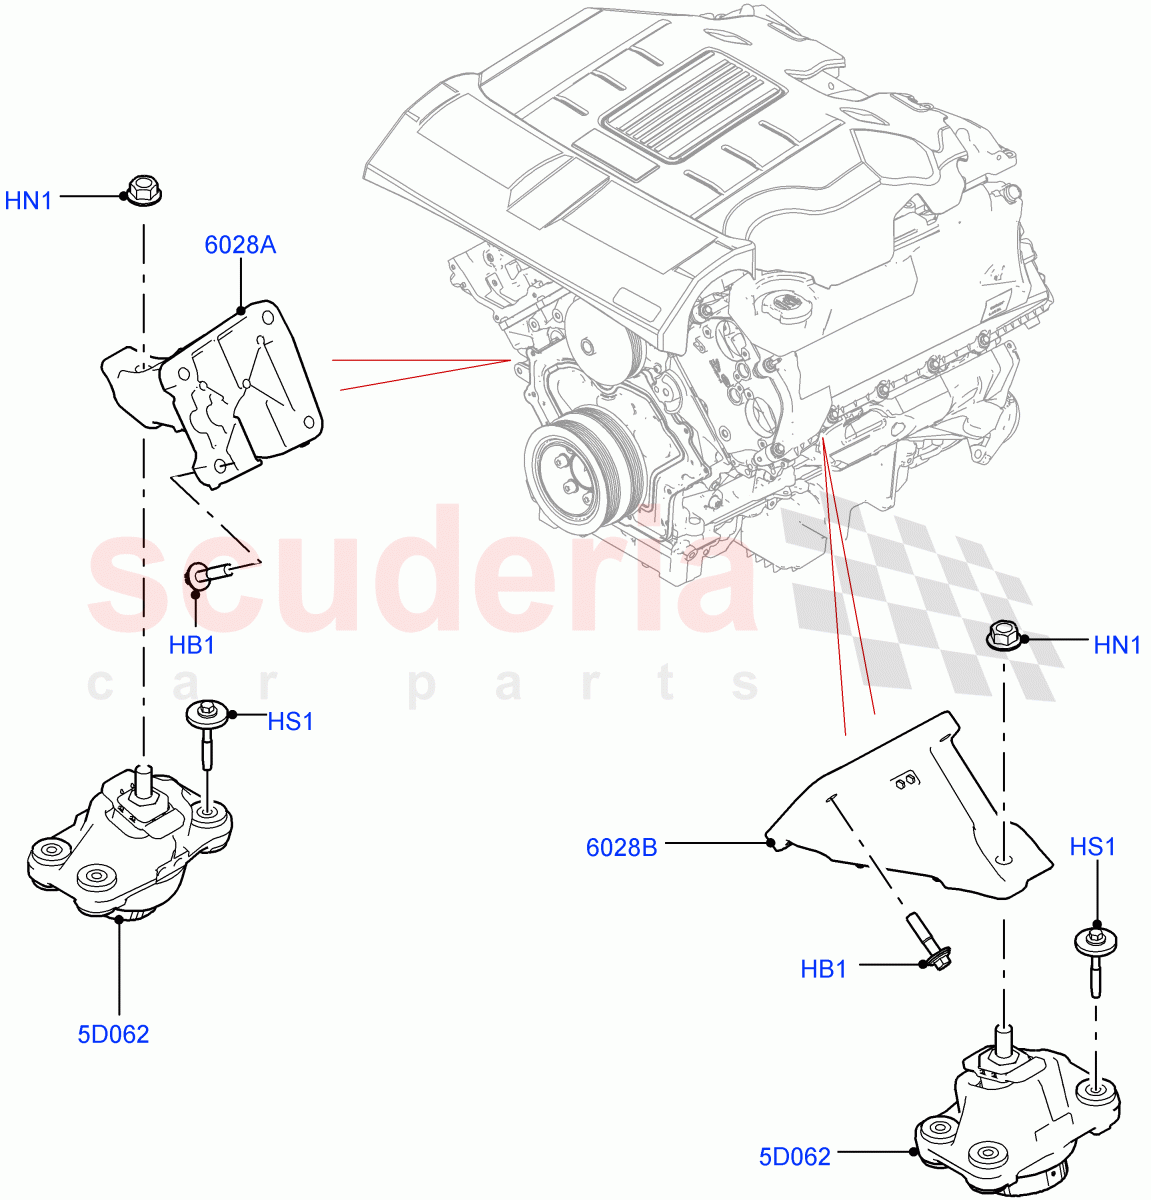 Engine Mounting(Nitra Plant Build)(3.0L DOHC GDI SC V6 PETROL)((V)FROMK2000001) of Land Rover Land Rover Discovery 5 (2017+) [3.0 Diesel 24V DOHC TC]